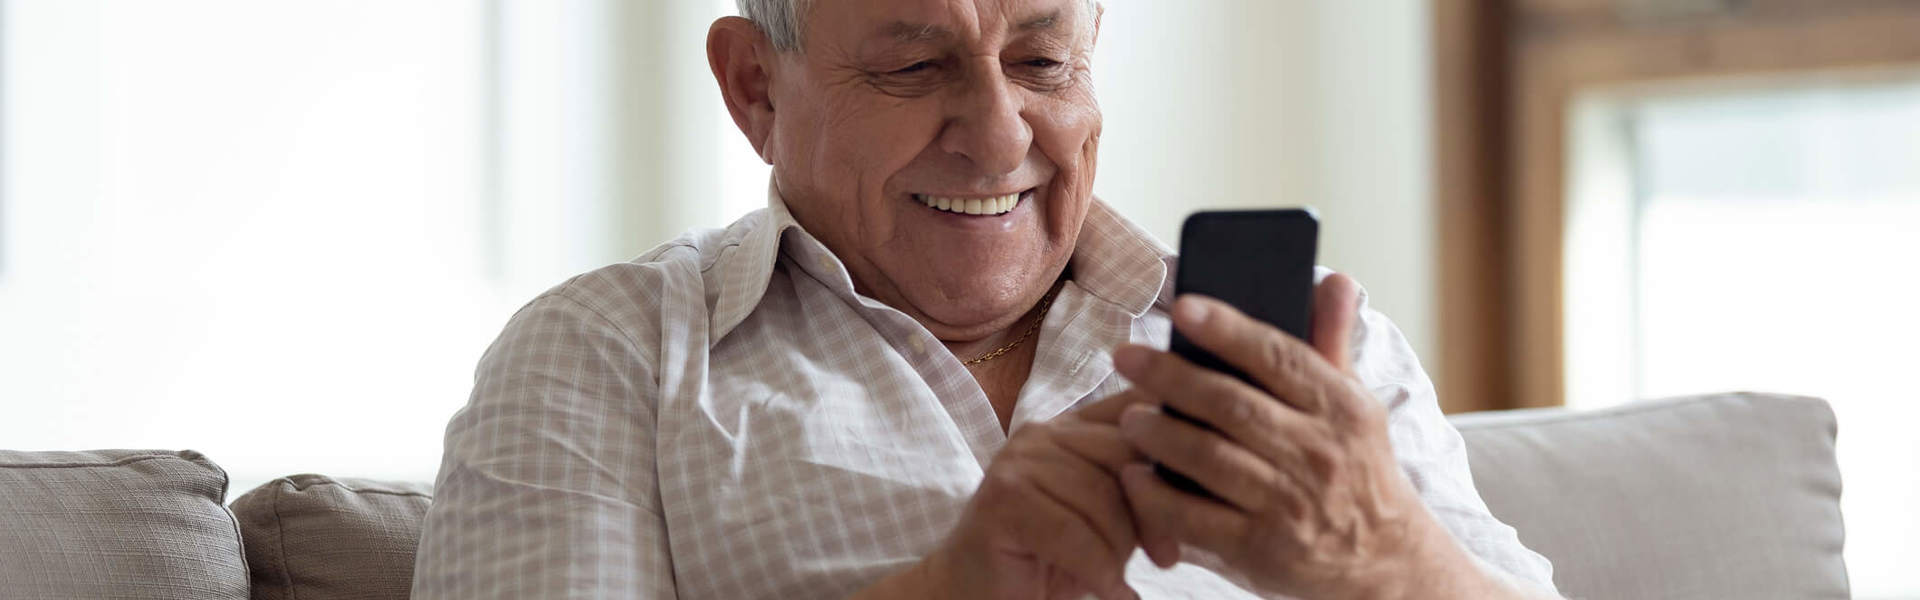 a older man looking at his phone and smiling